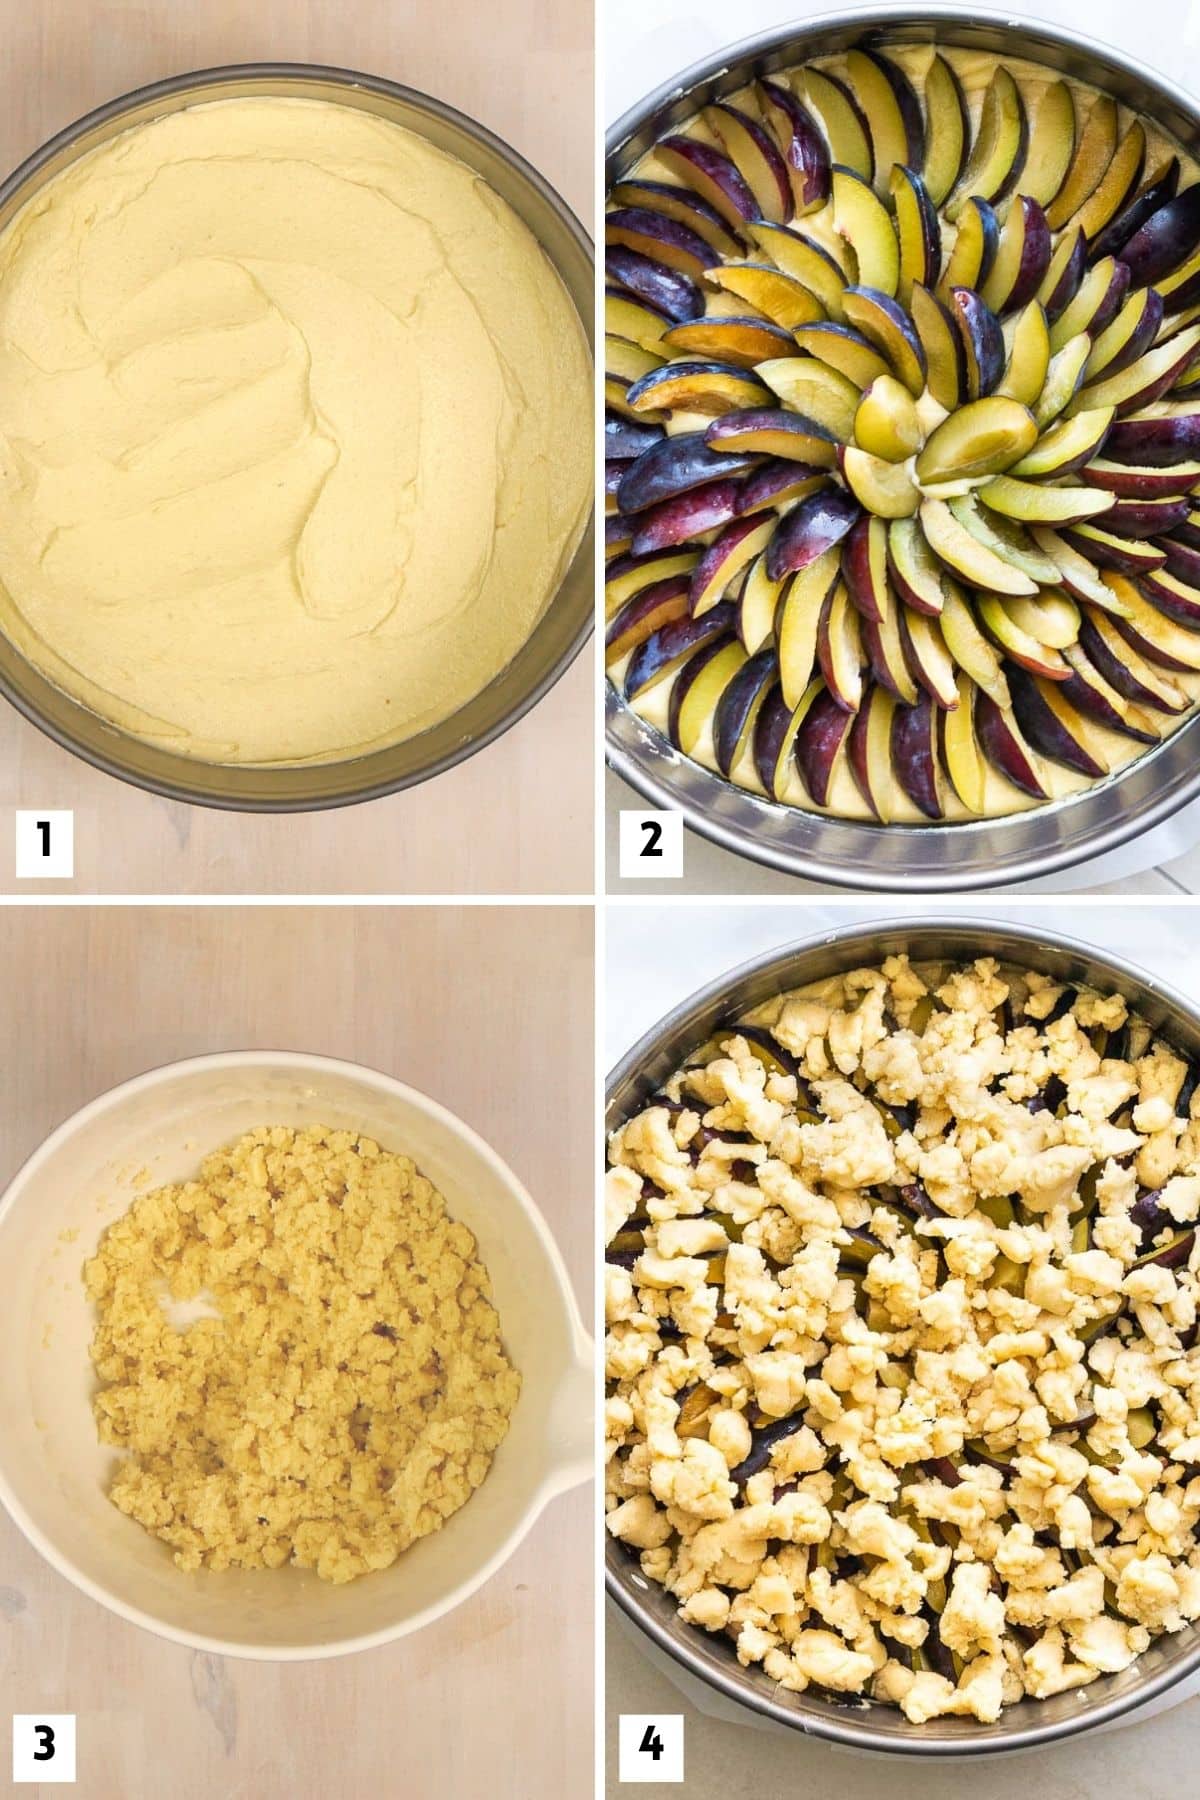 Steps for making German Plum Cake from scratch.